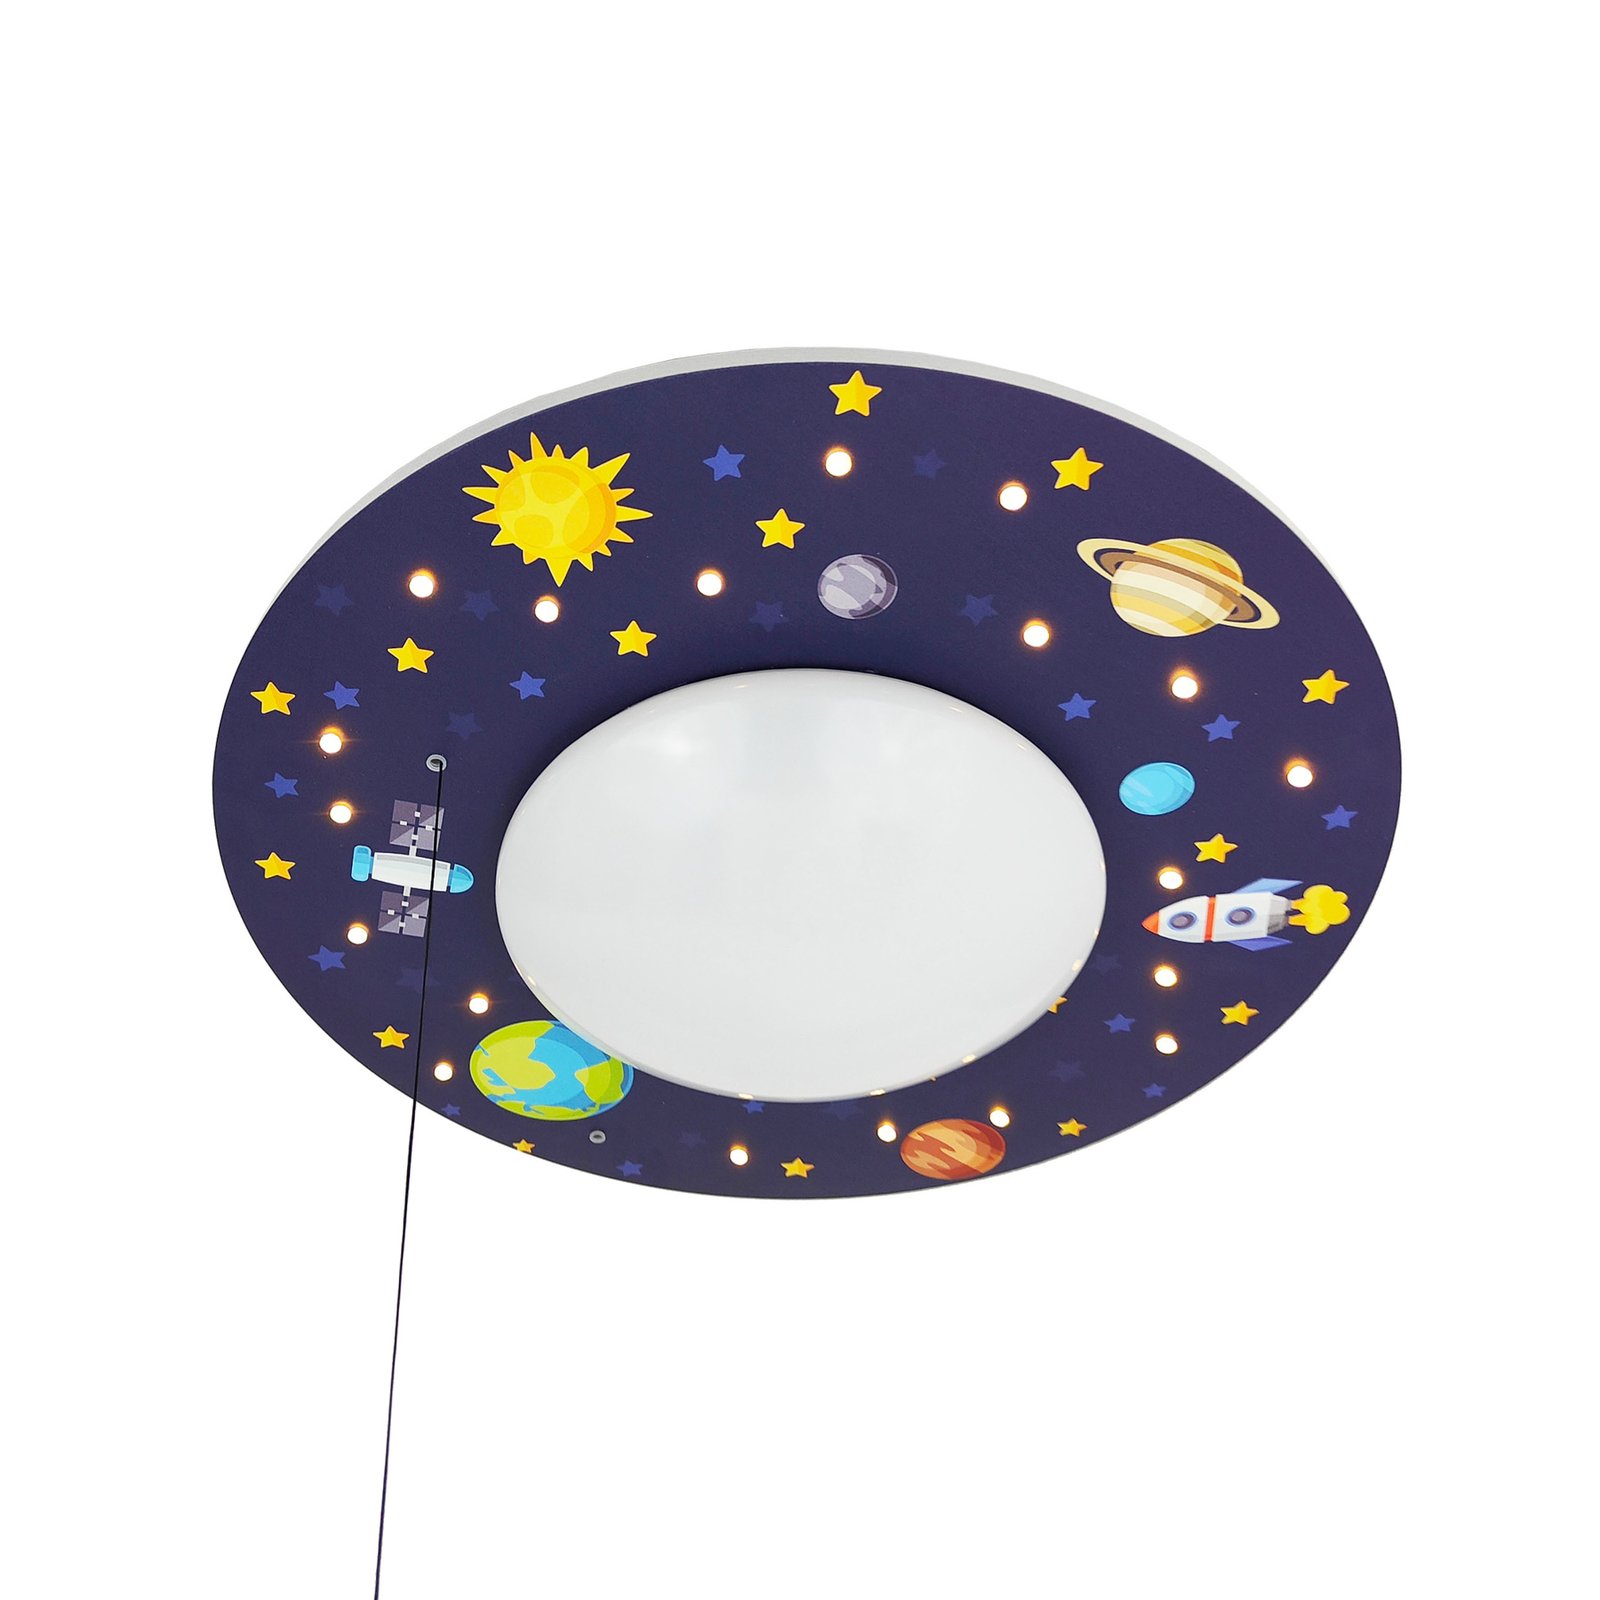 Space ceiling light with an LED starry sky